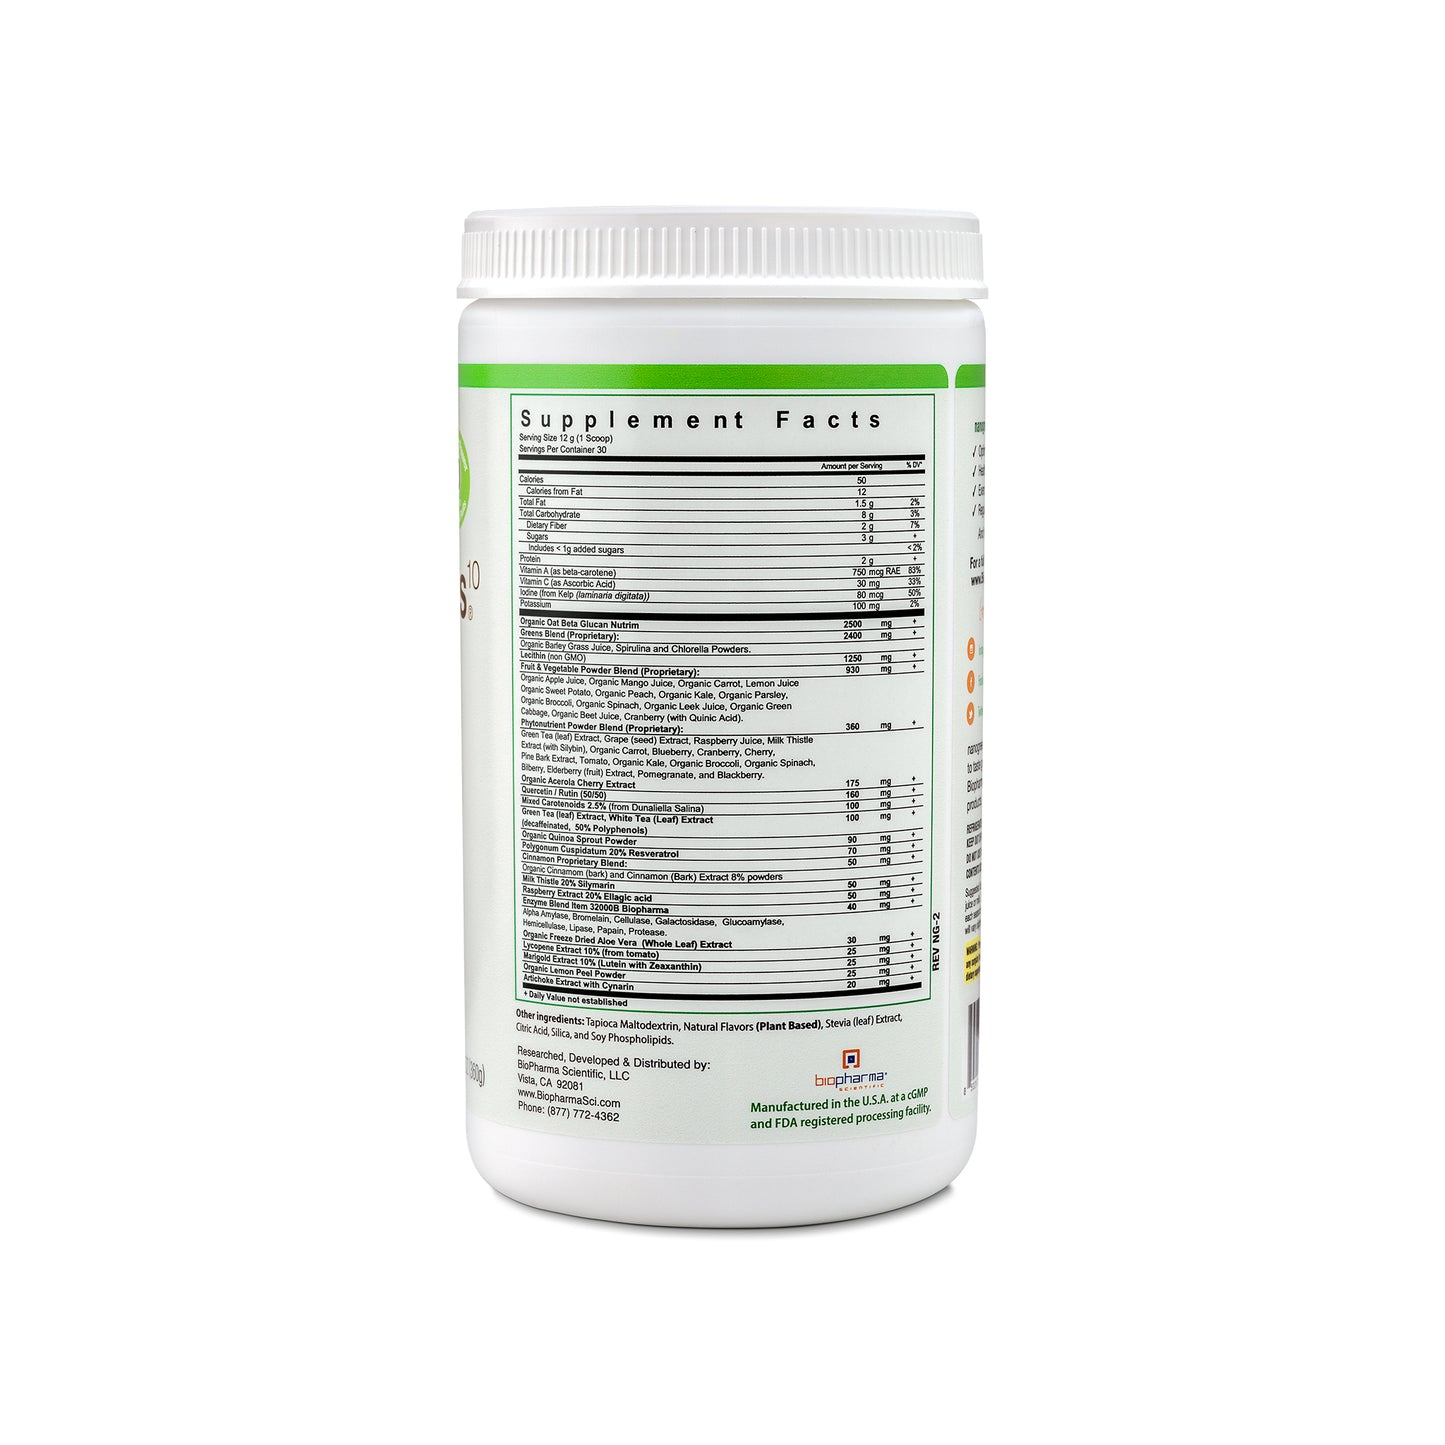 nanogreens green apple fruit and vegetable superfood powder supplement - back side with nutrition facts